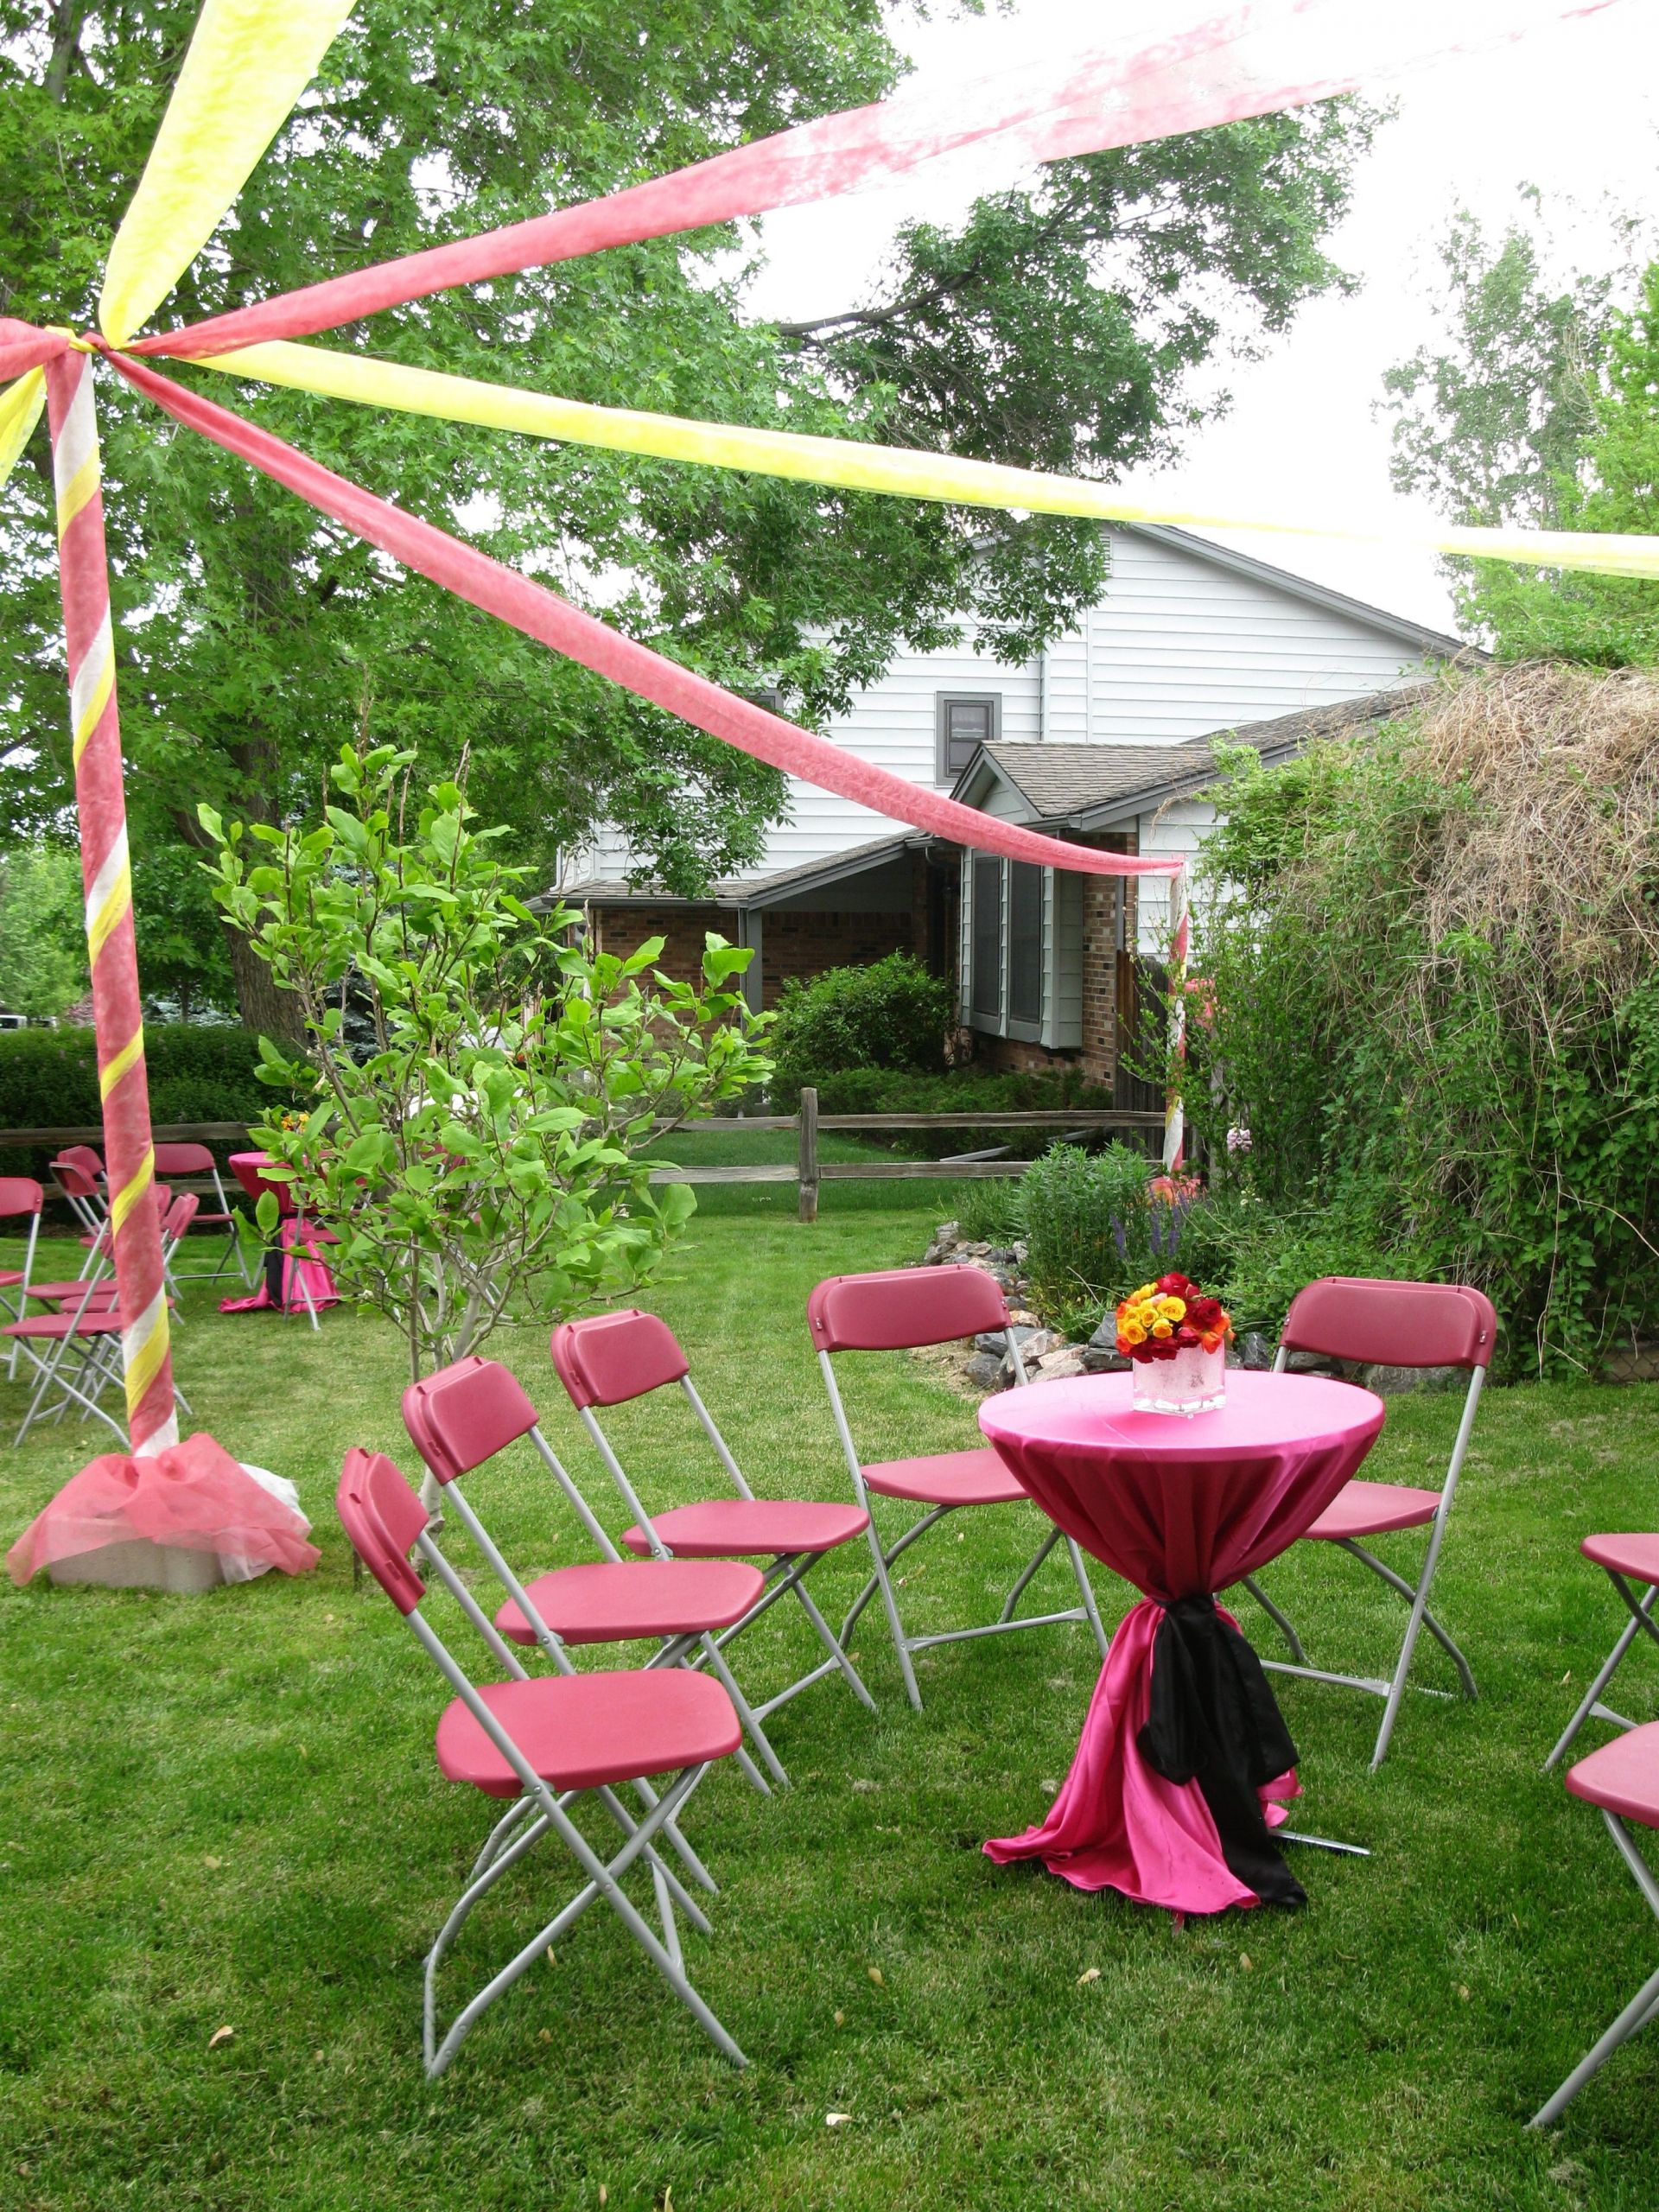 Graduation Party Ideas For A Small Backyard
 Graduation parties red and yellow outdoor party